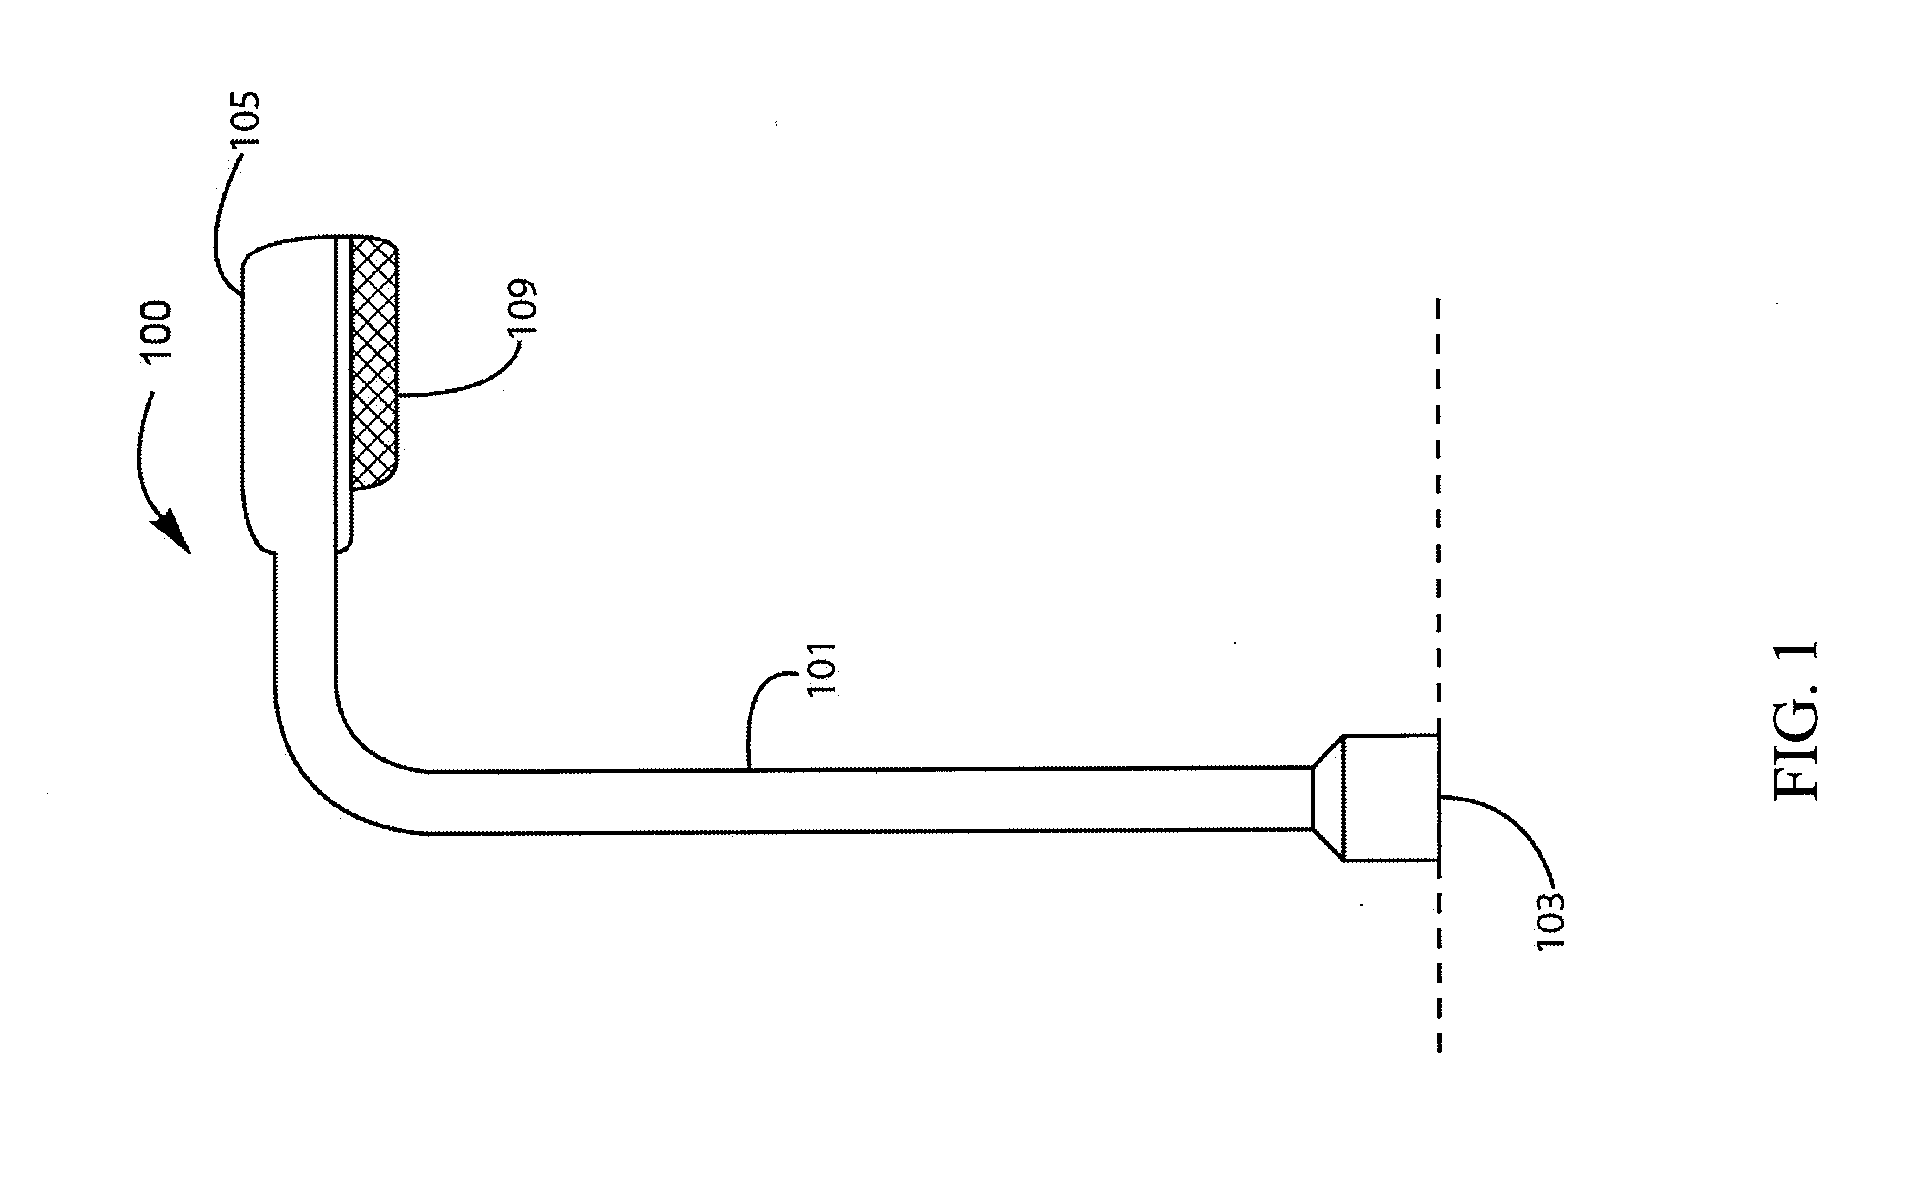 Method and System for Converting a Sodium Street Lamp to an Efficient White Light Source